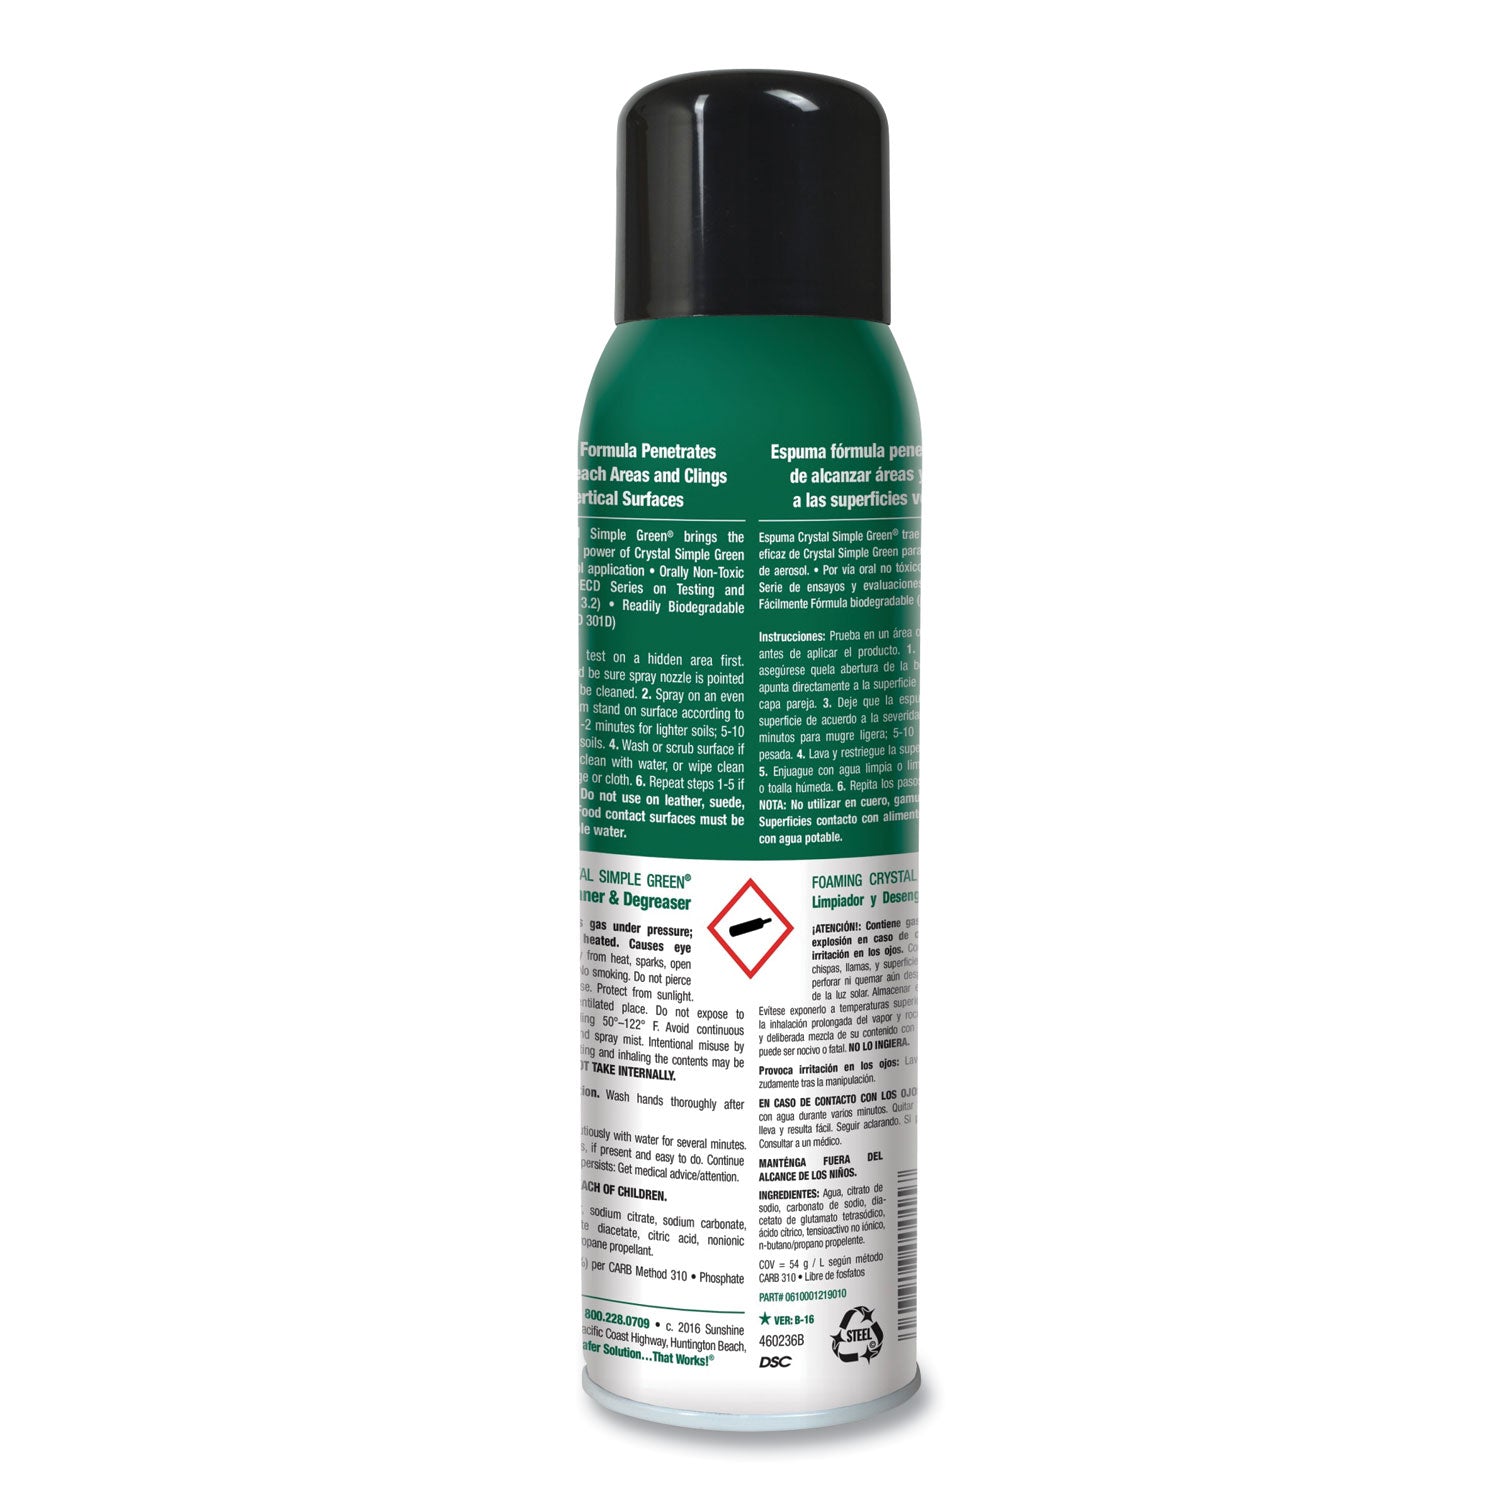 foaming-crystal-industrial-cleaner-and-degreaser-20-oz-aerosol-spray-12-carton_smp19010 - 3